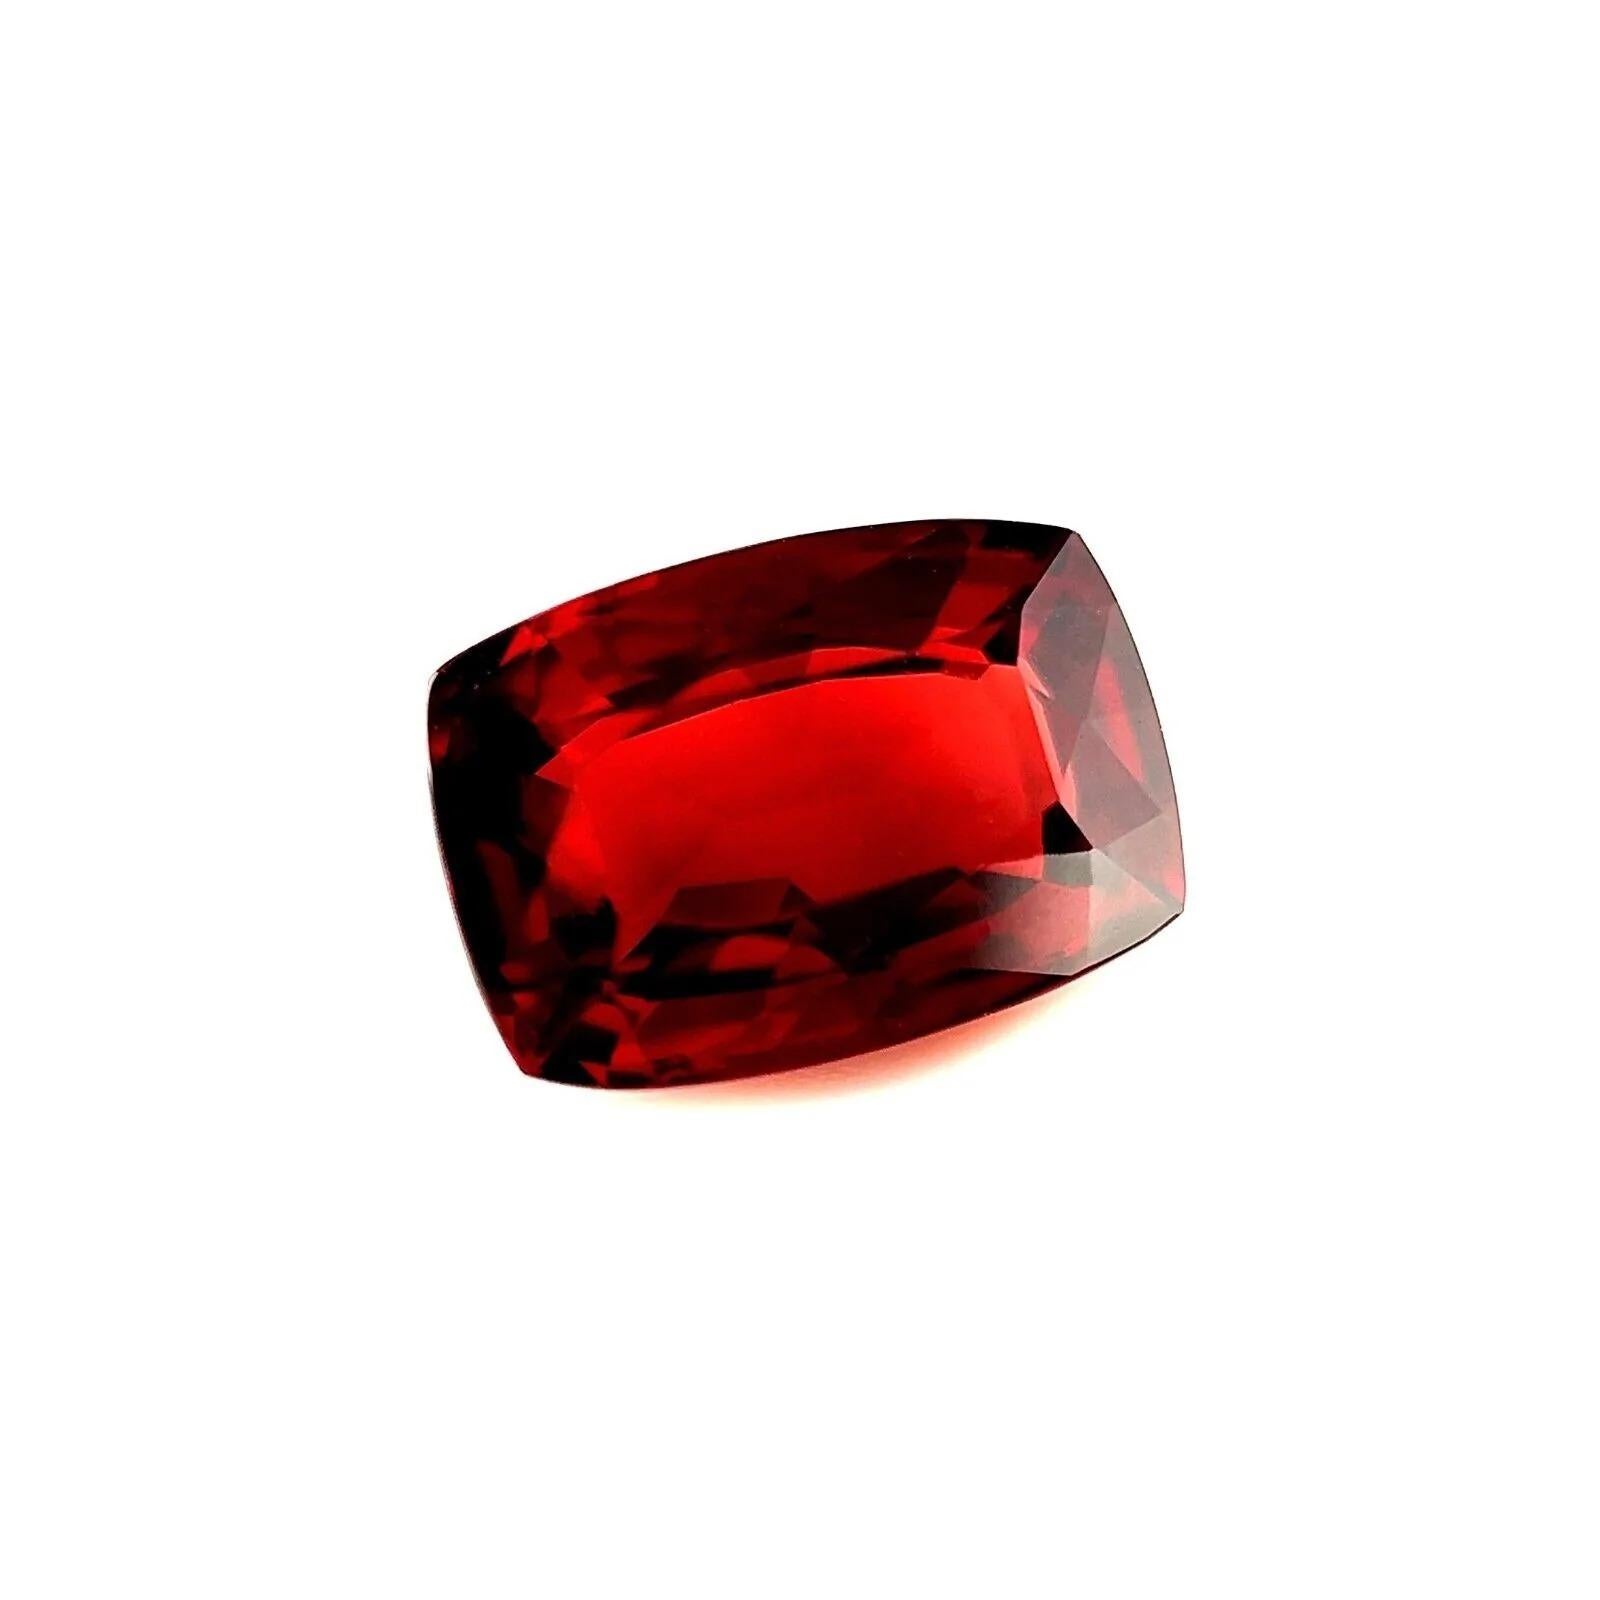 2.76ct Fine Reddish Pink Rhodolite Garnet Cushion Cut 9.5x6.5mm Loose Gem

Fine Natural Vivid Reddish Pink Rhodolite Garnet Gem.
2.76 Carat with a beautiful vivid reddish pink colour and very good clarity, only some very small natural inclusions